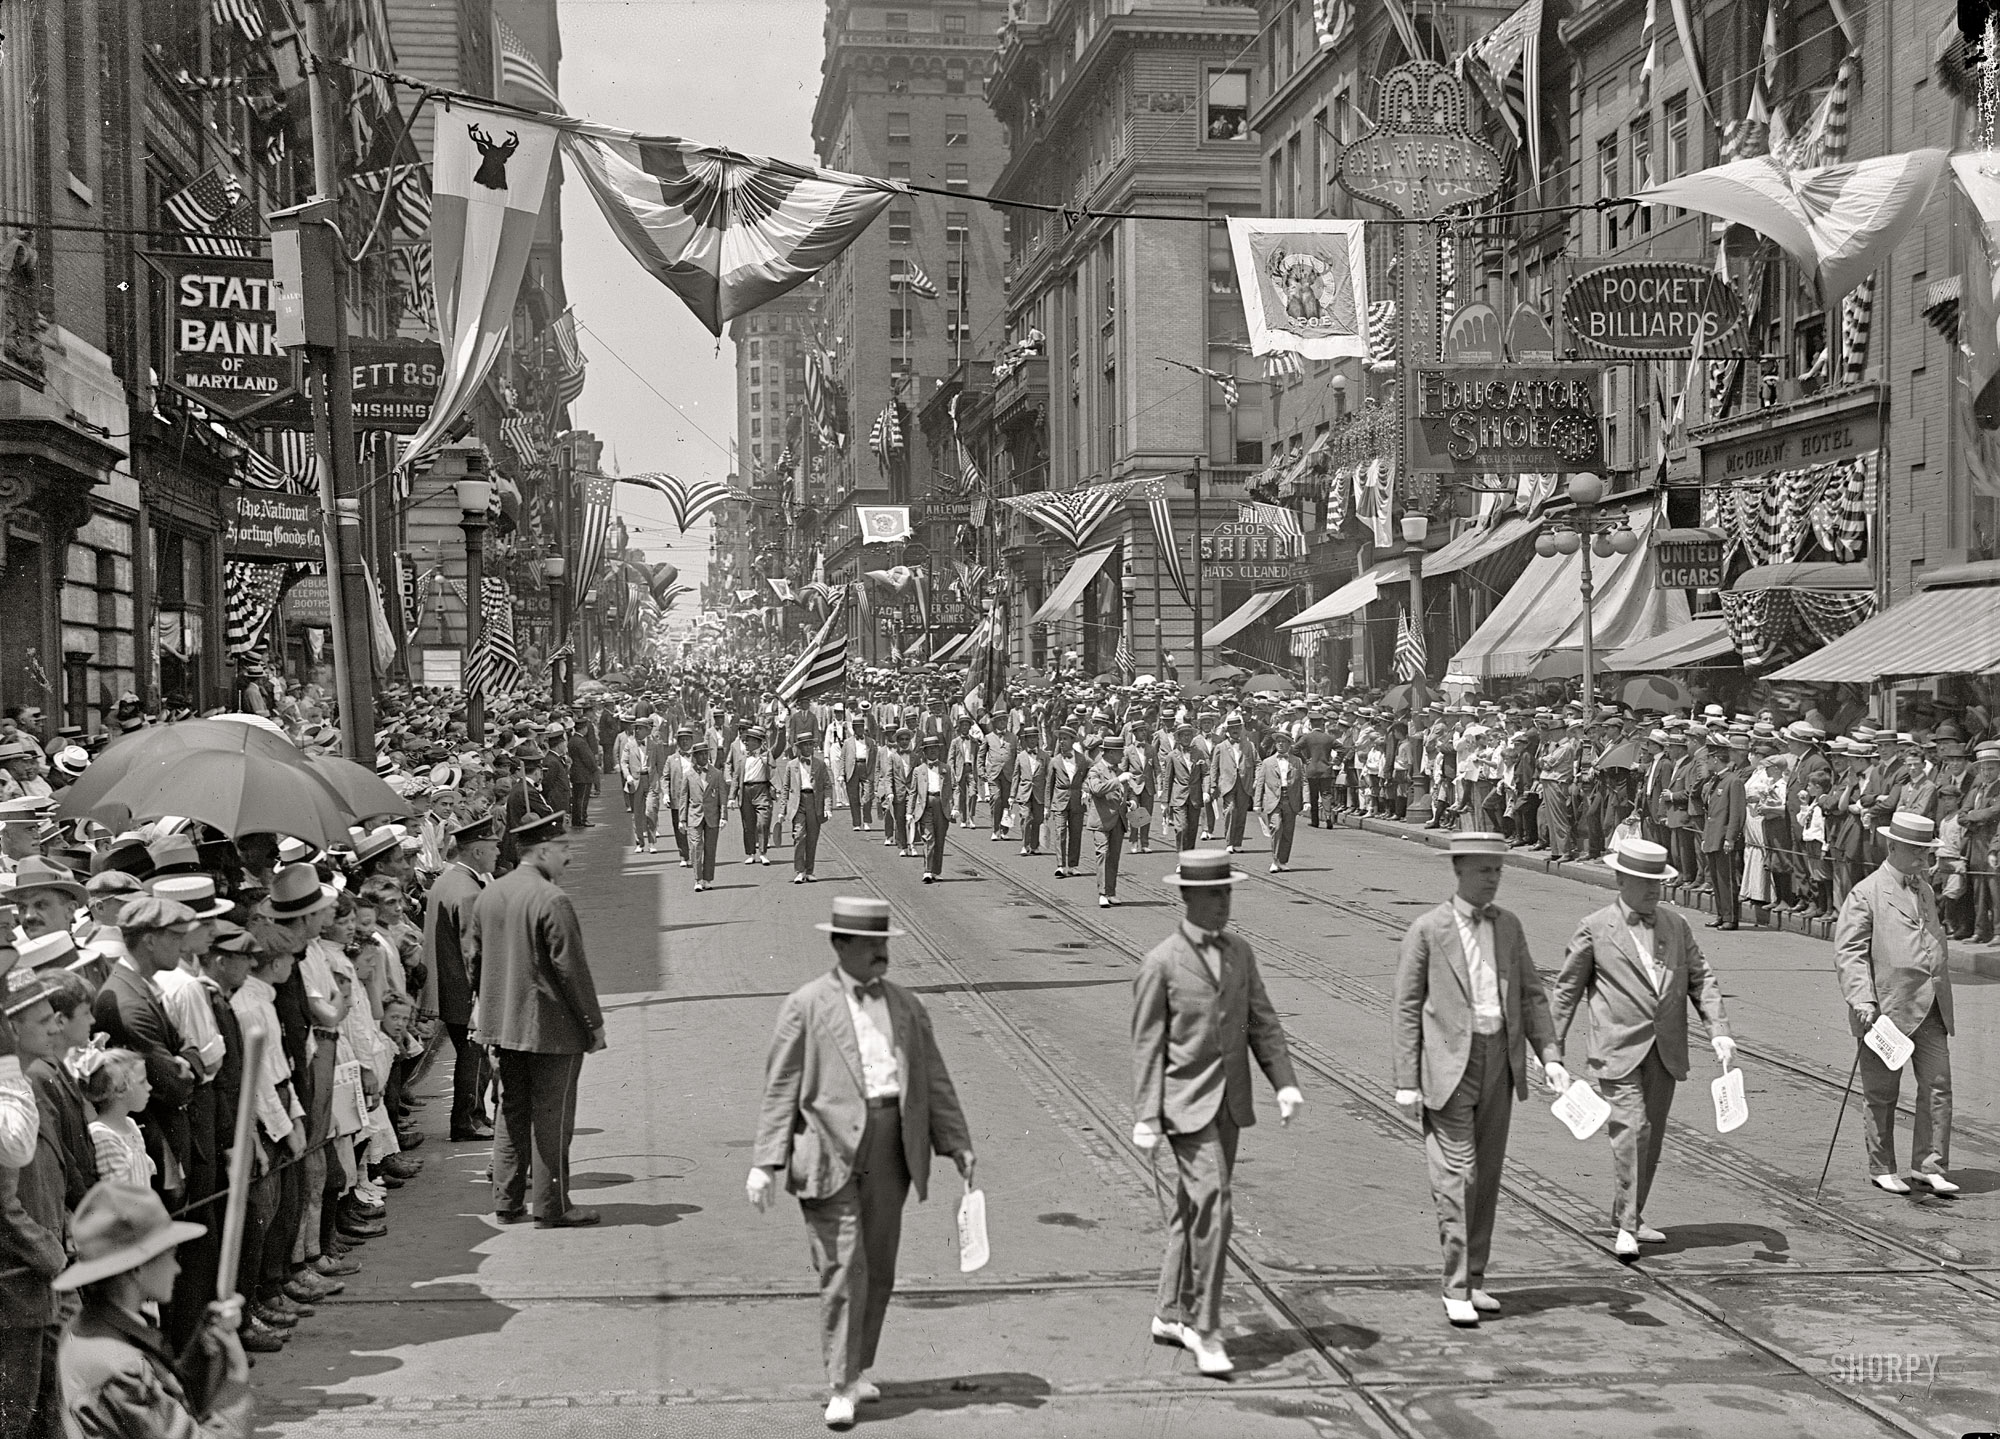 "Elks parade in Baltimore, 1916." The message on those paddle fans: "Bromo-Seltzer." Harris & Ewing Collection glass negative. View full size.